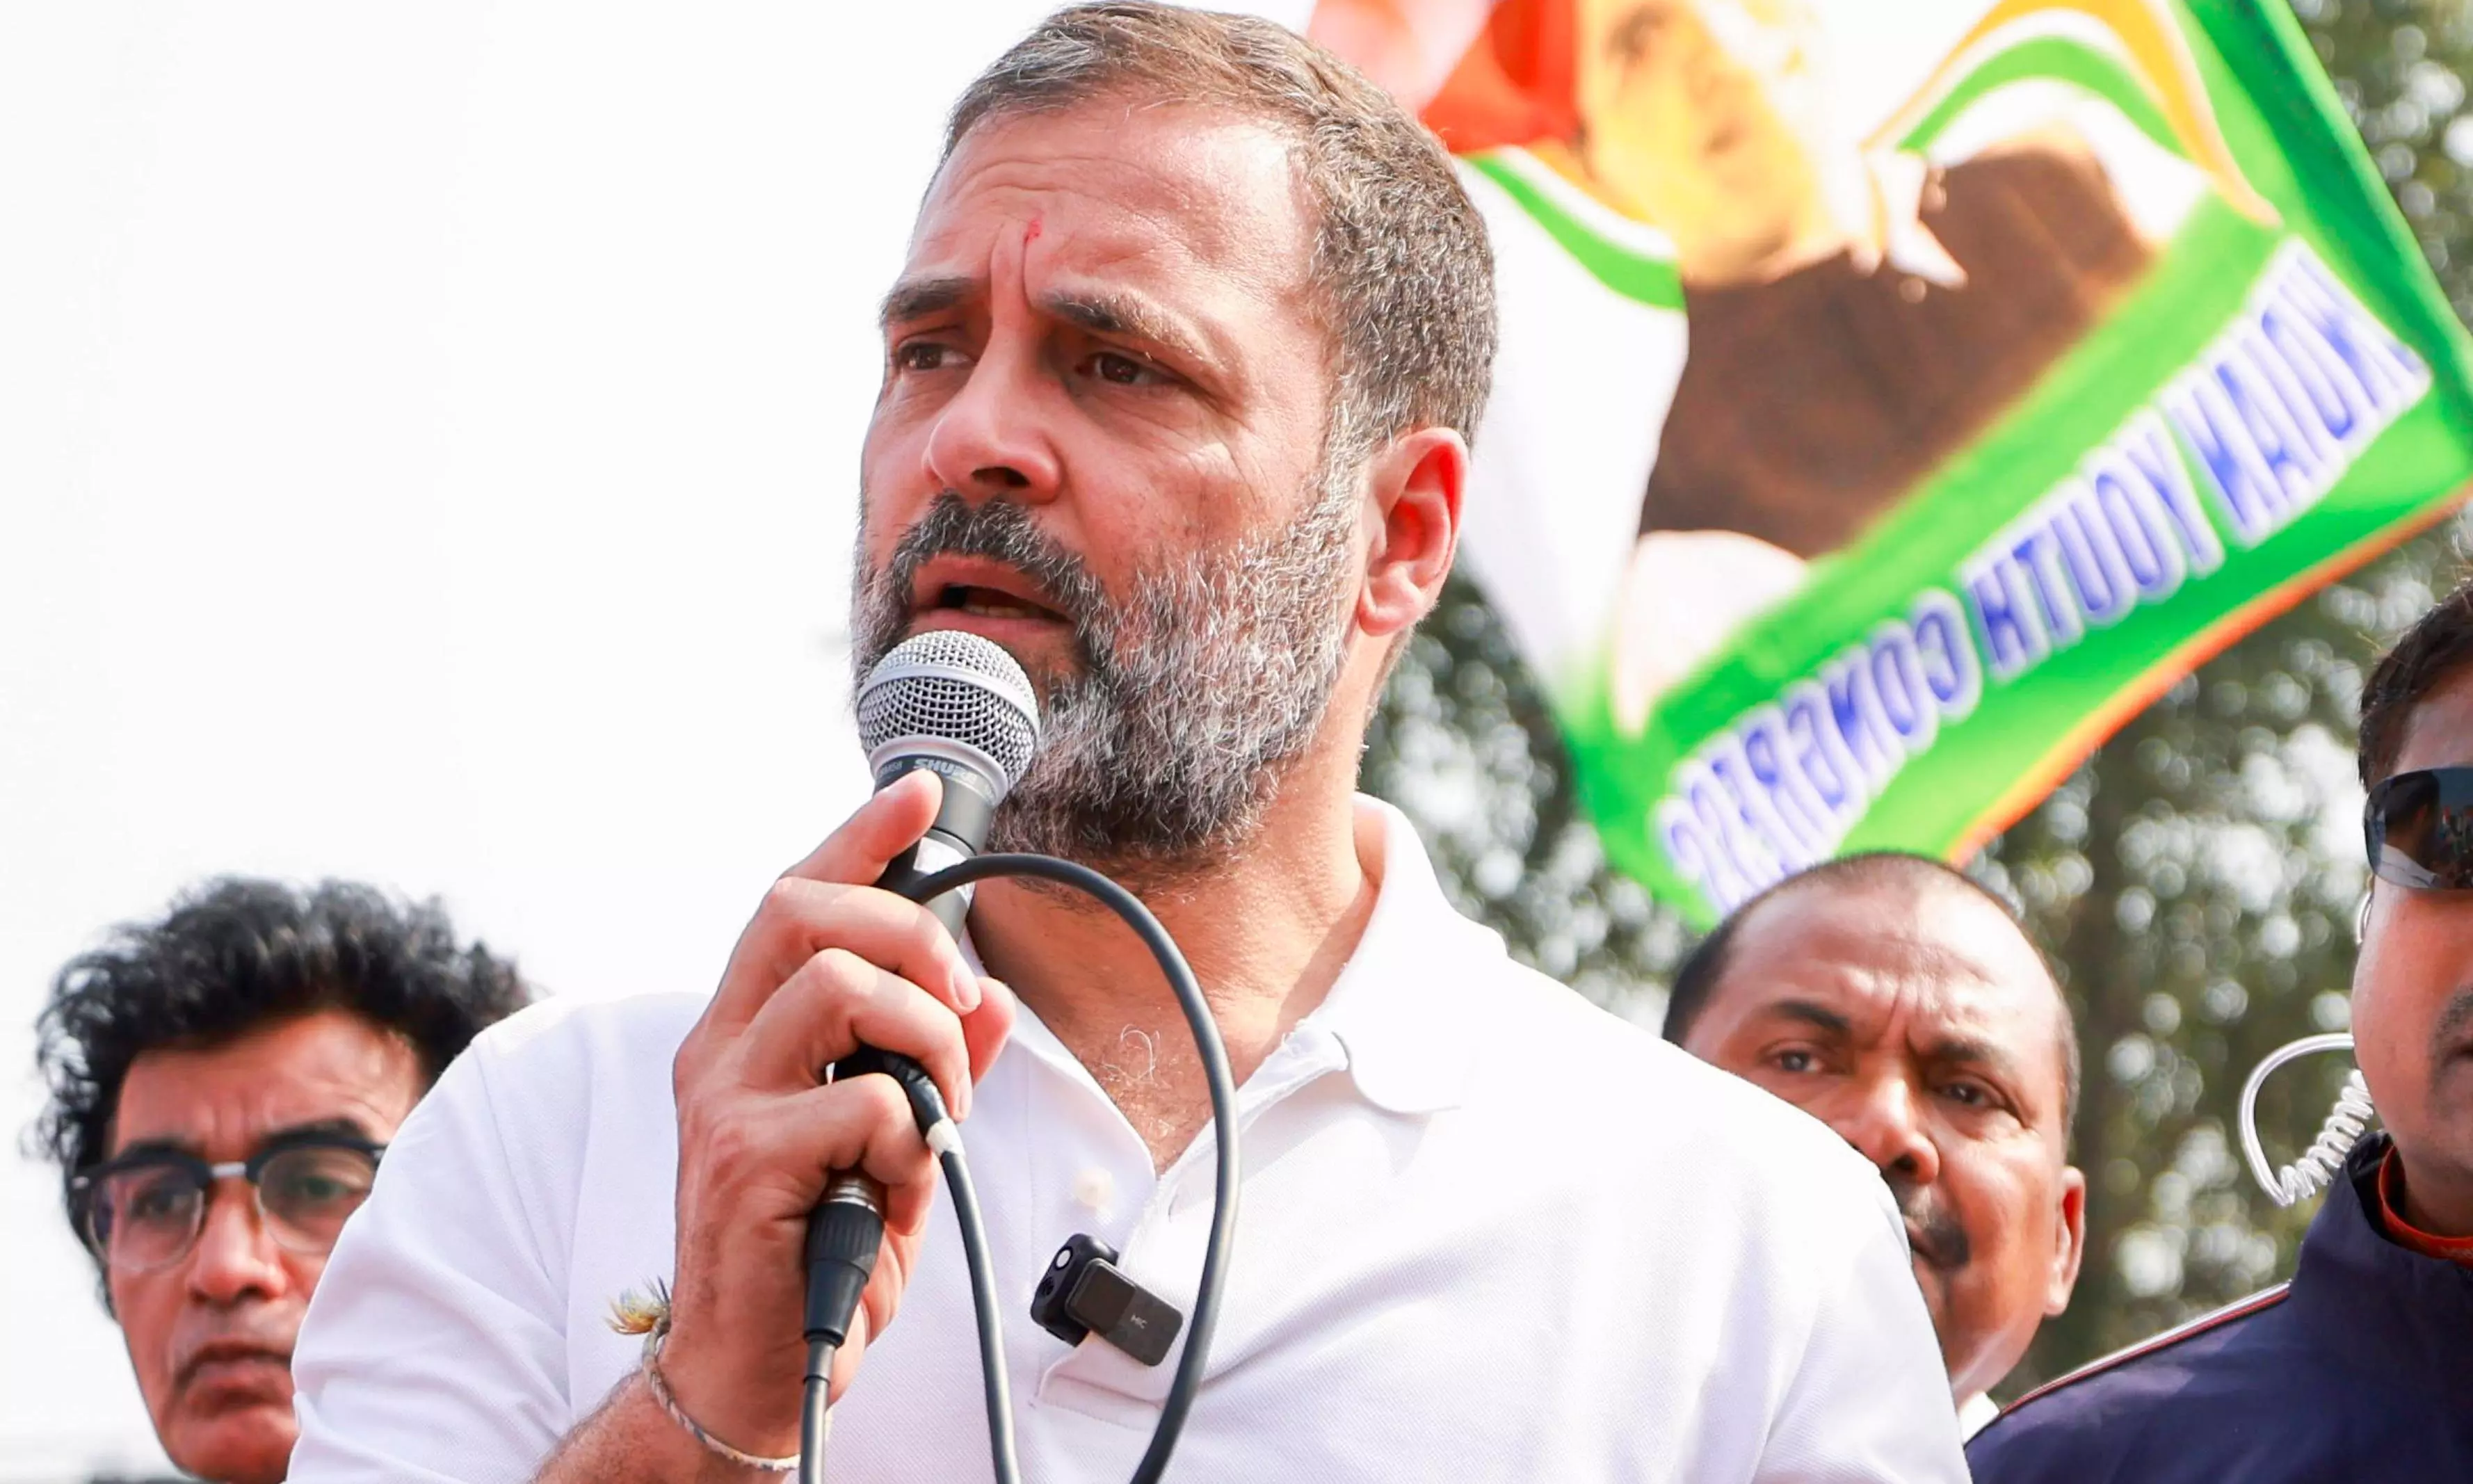 Centre splurging resources on few industrialists while poor face neglect: Rahul Gandhi